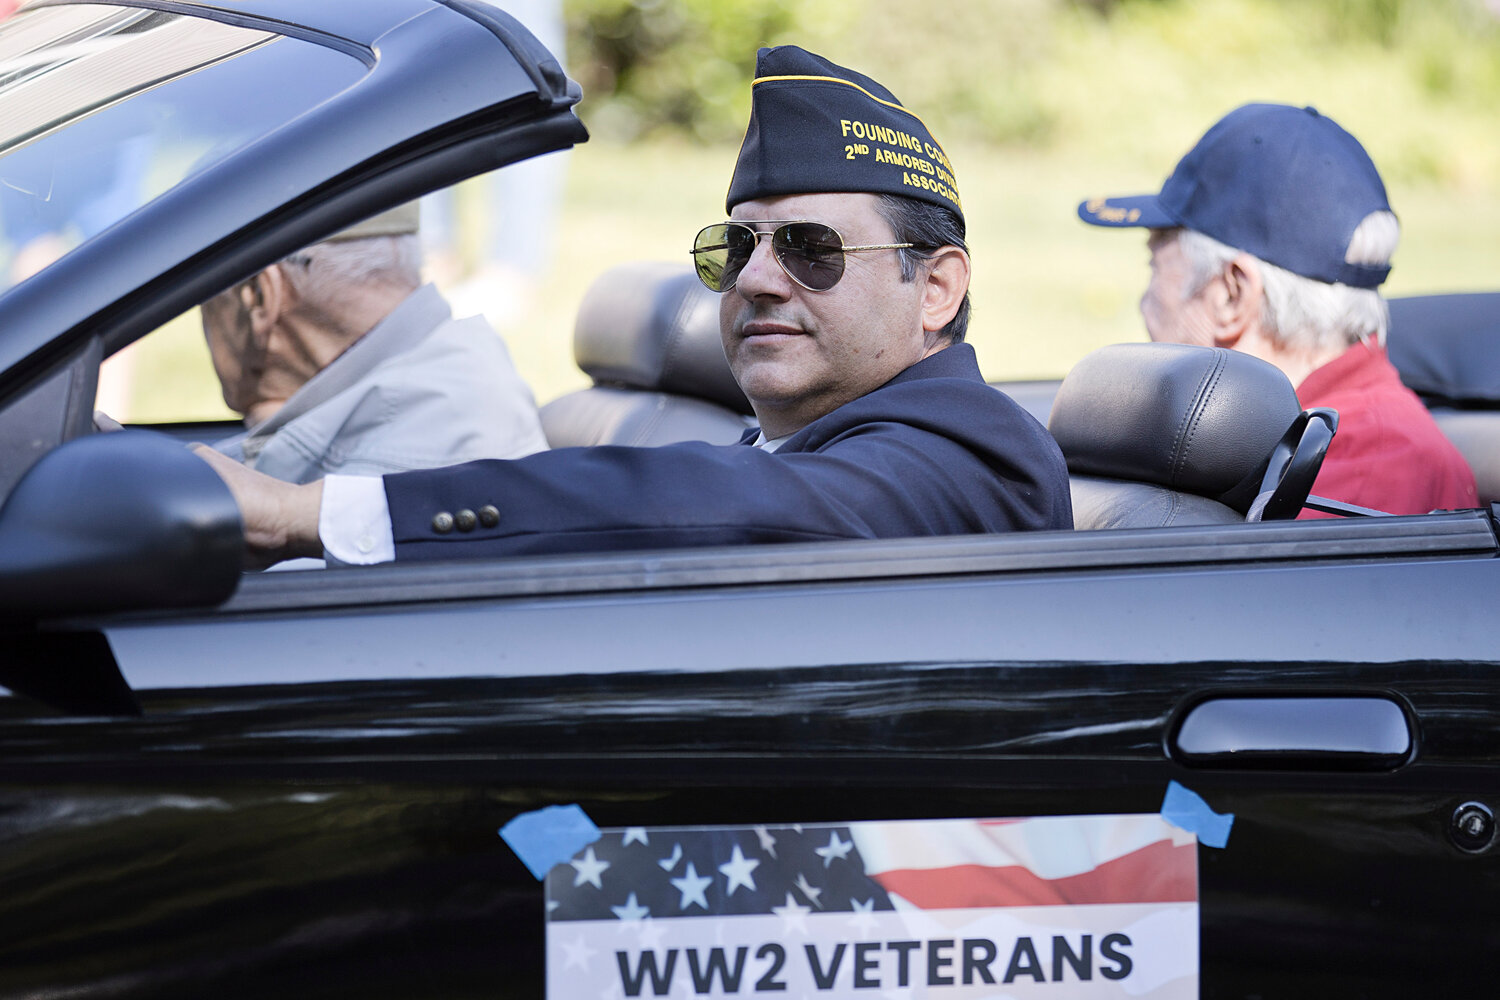 Lt. Colonel Paul C. Dulchinos, Sr. (US Army Retired) along with other Veterans, is recognized in the 1st Division of Barrington's Memorial Day Parade, Monday.